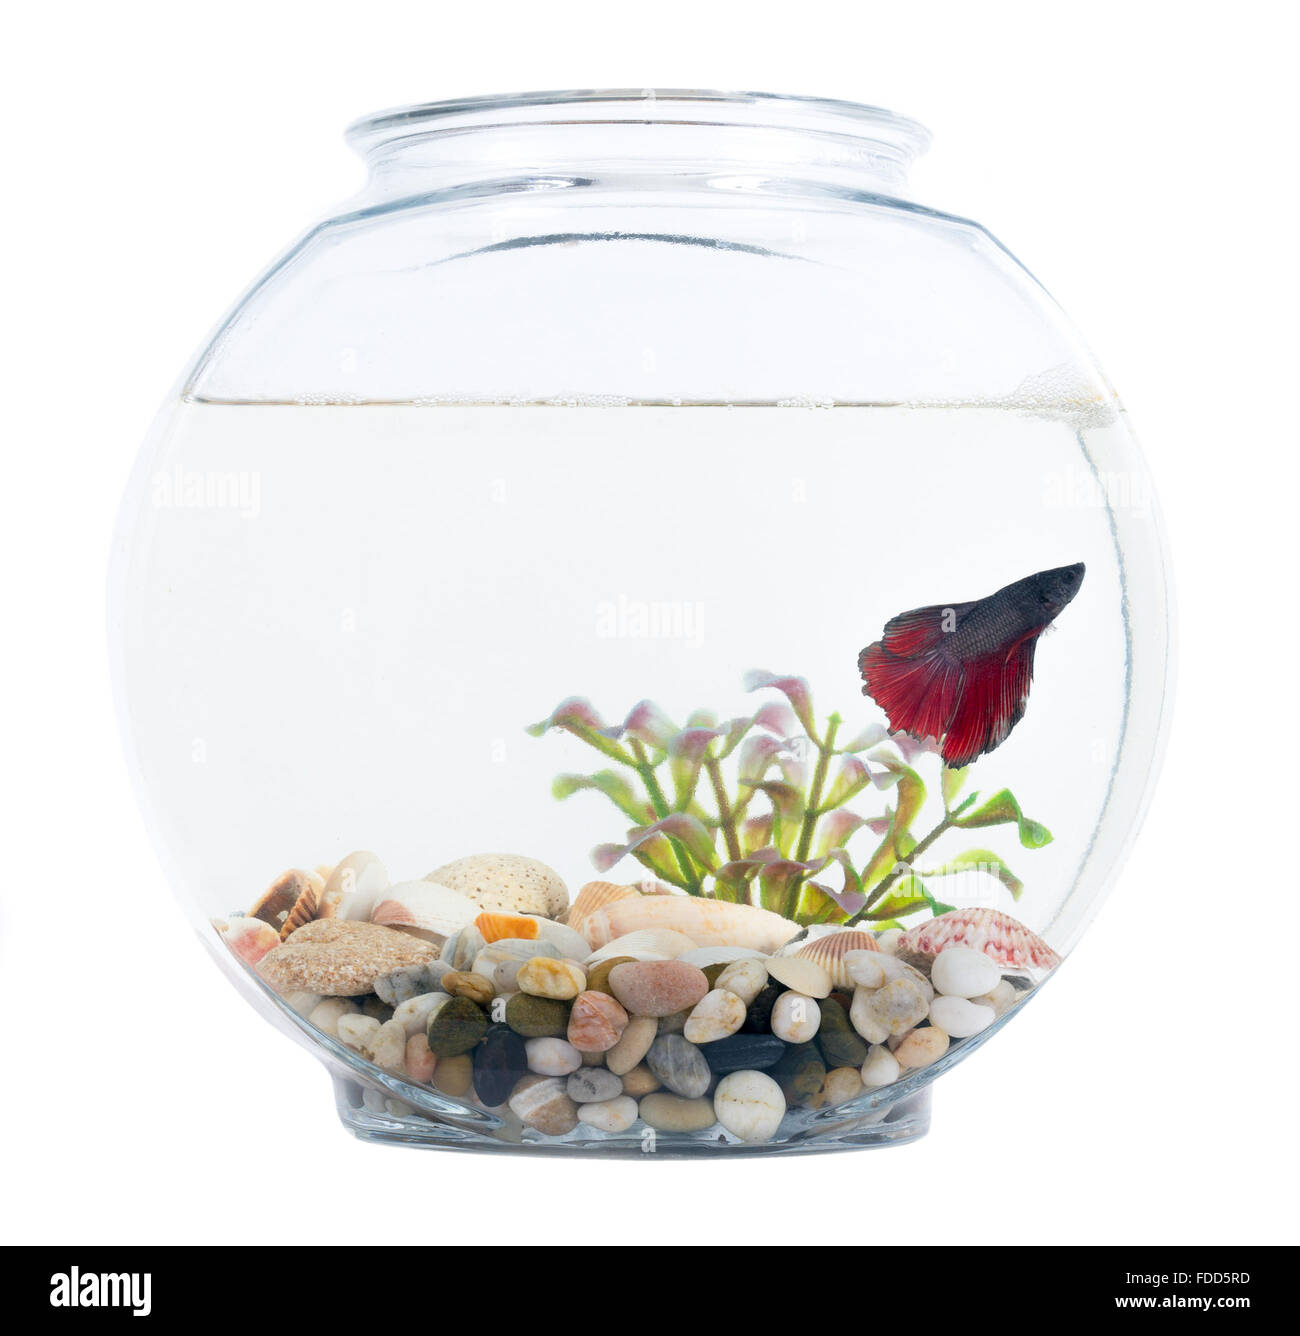 Siamese fighting fish in fish bowl isolated over white background Stock  Photo - Alamy